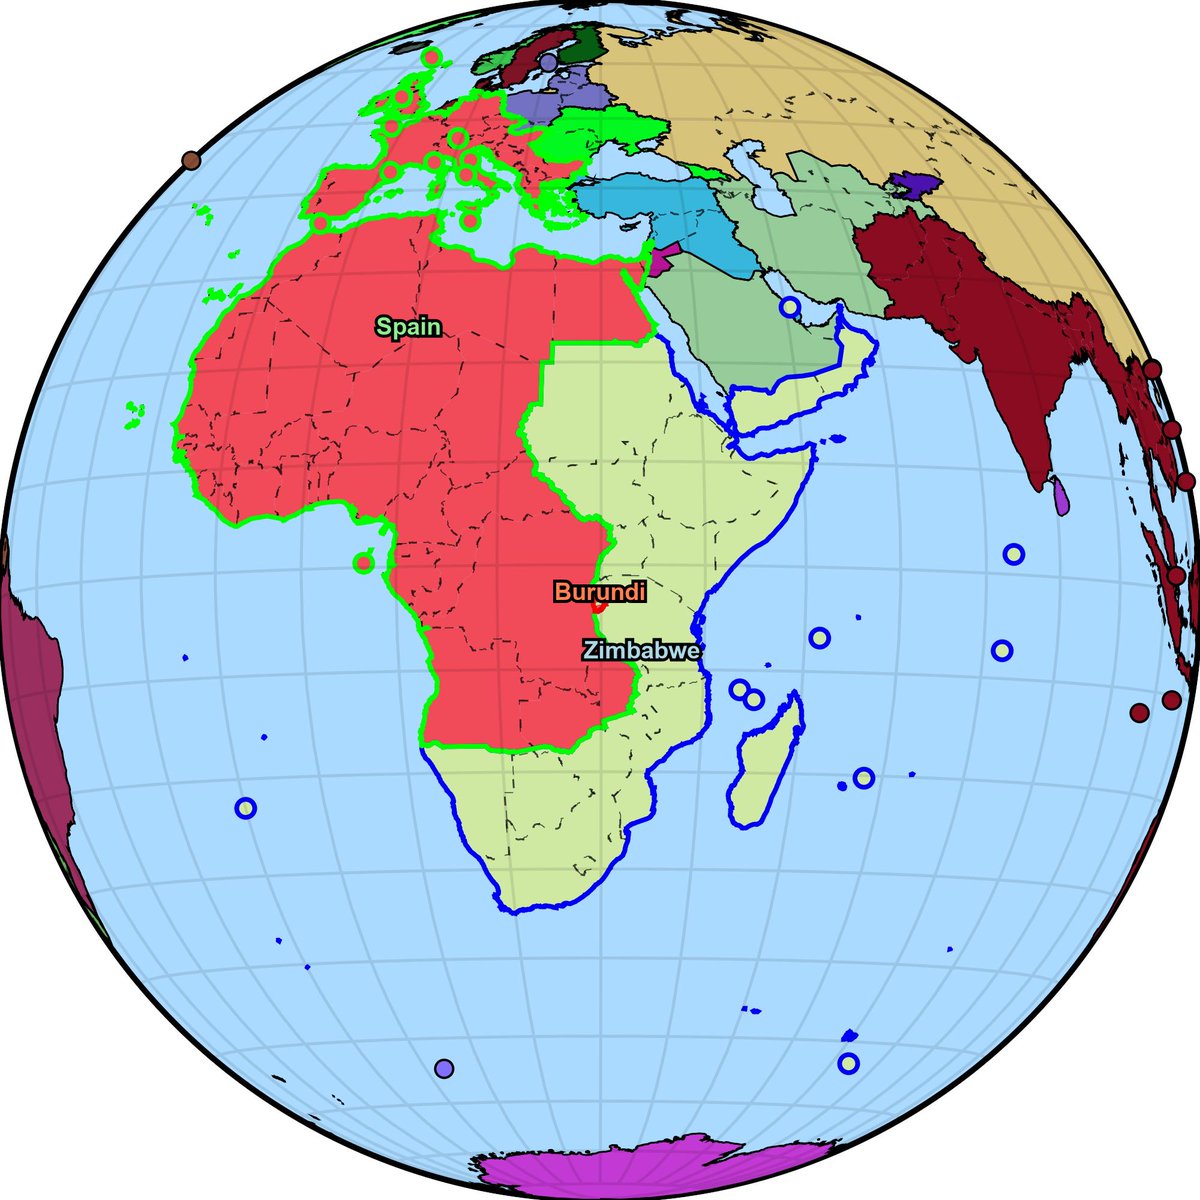 December 2096, Spain conquered Burundi territory previously occupied by Zimbabwe.